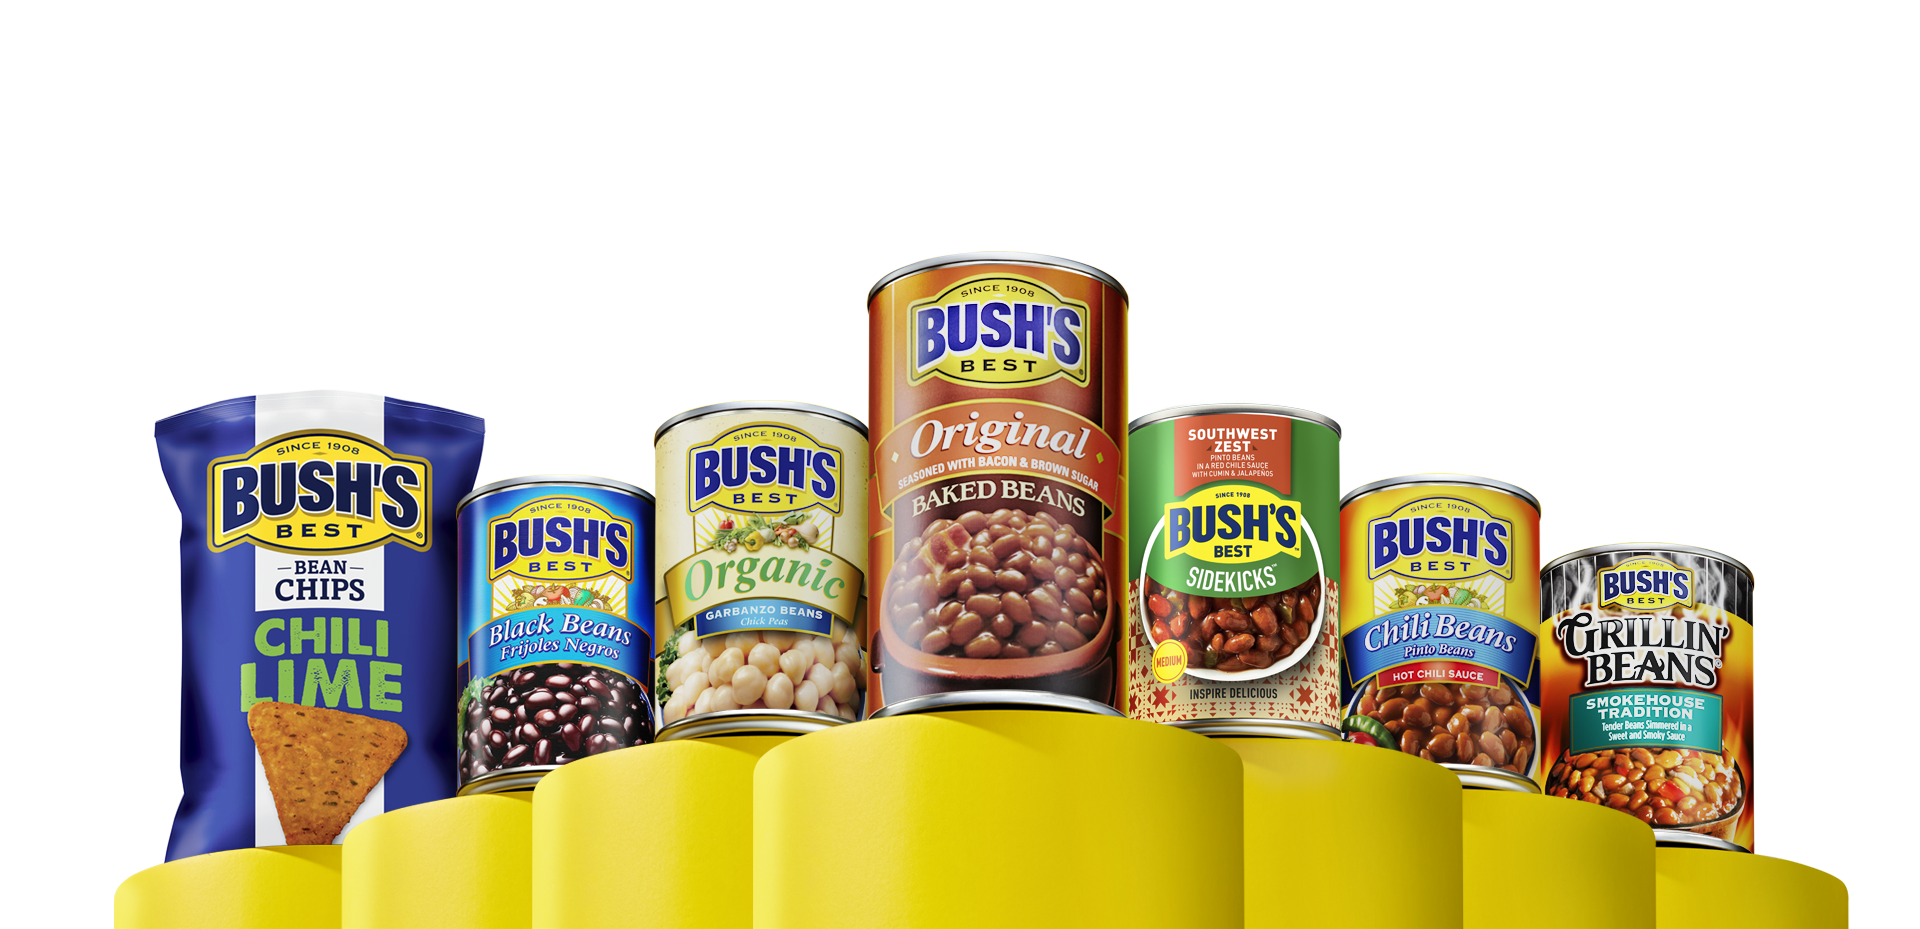 Cans of Bush’s beans and one bag of Bush’s bean chips arranged on a platform of yellow columns